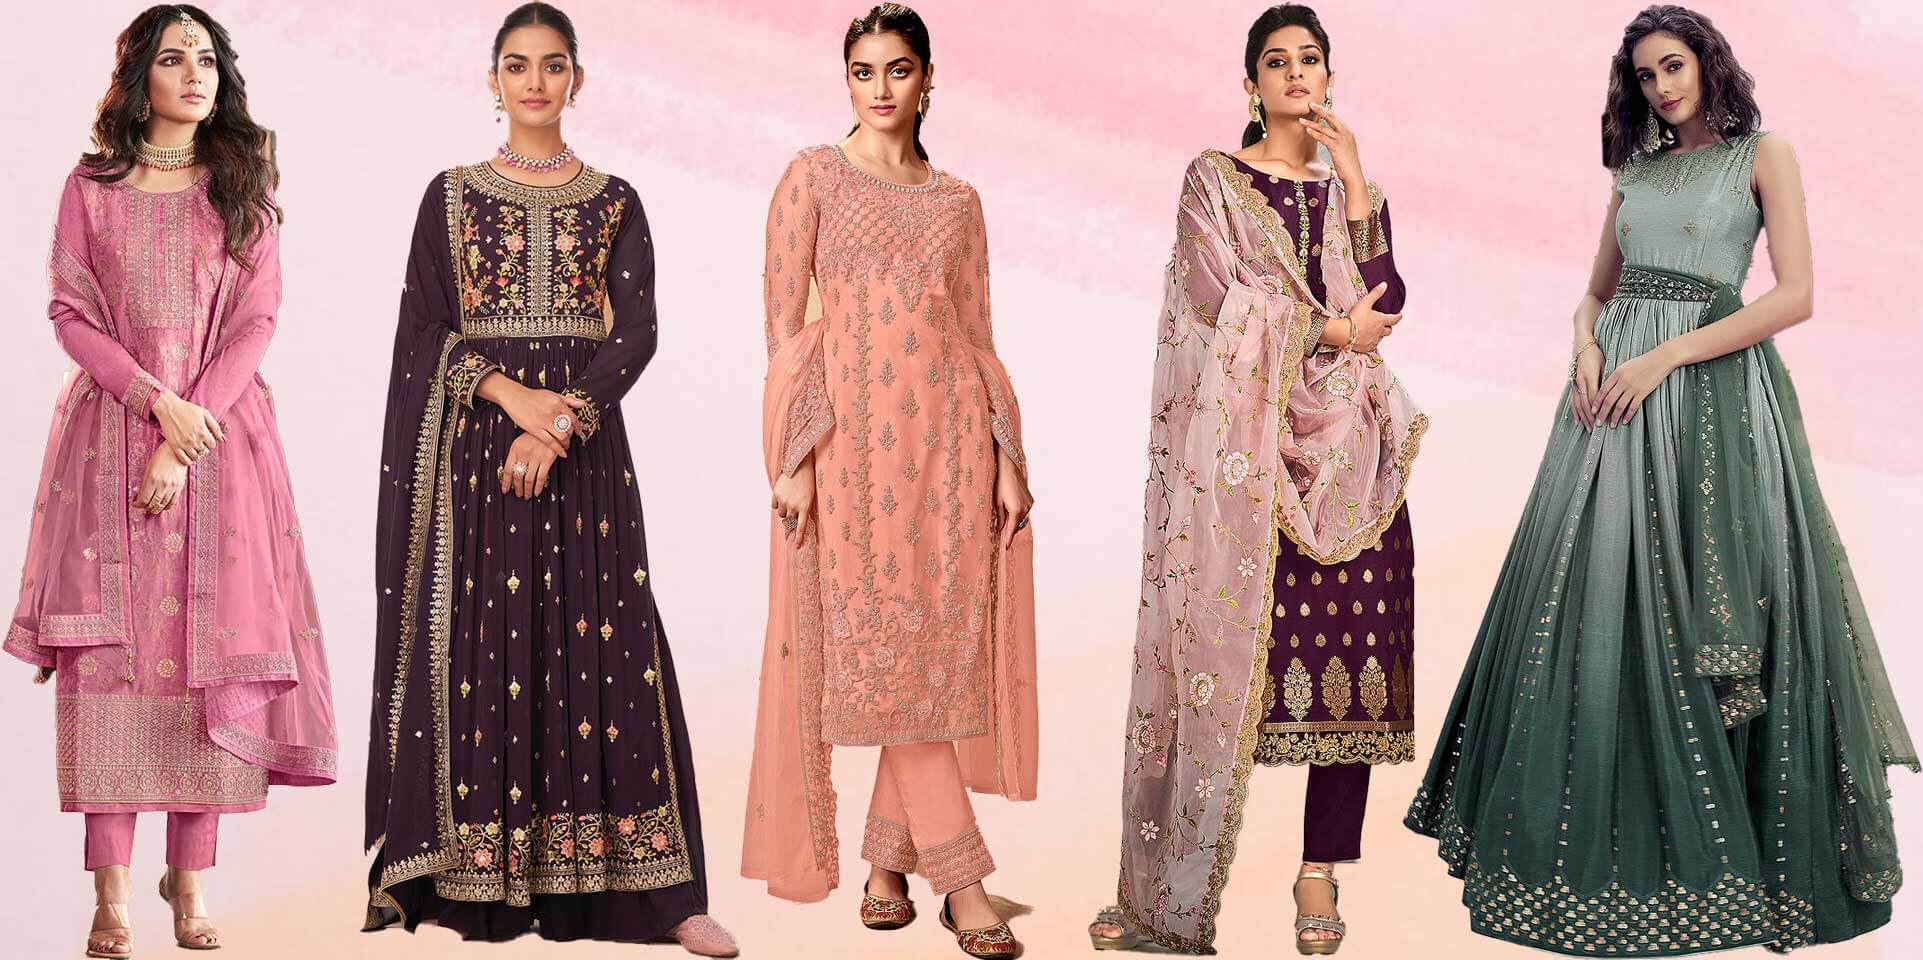 What Are the Different Types of Salwar Kameez?